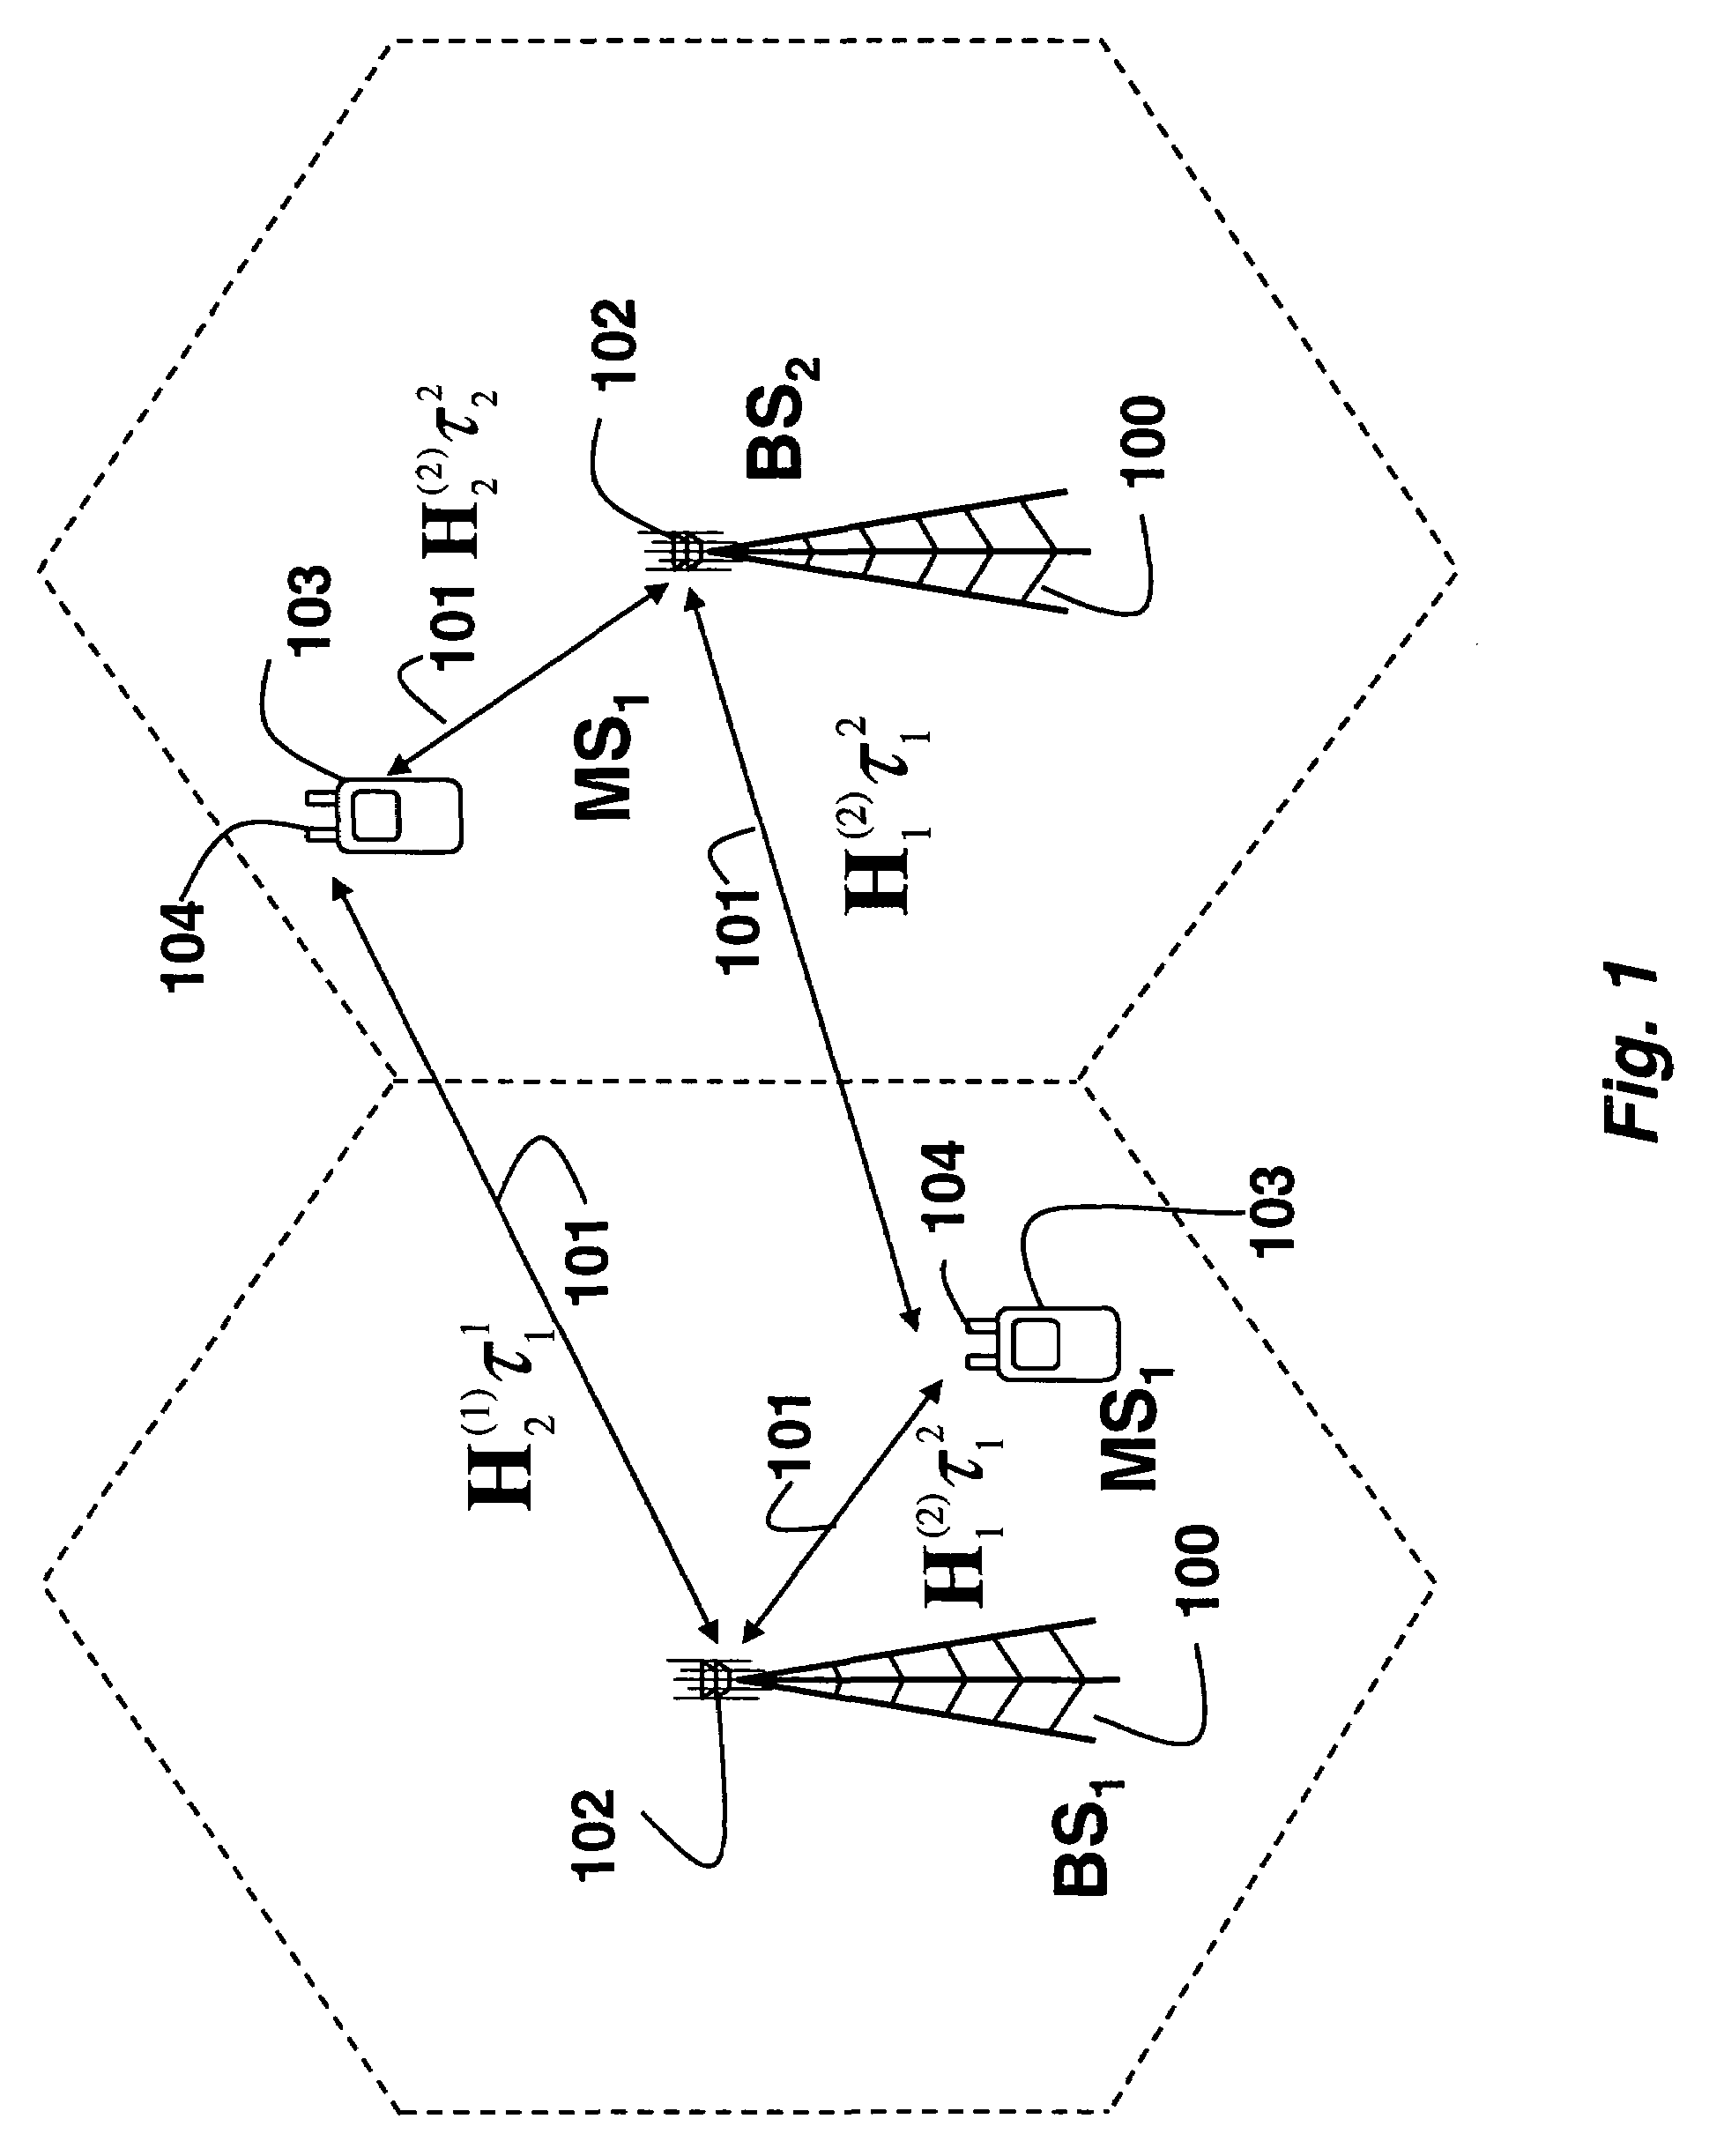 System and method for transmitting signals in cooperative base station multi-user mimo networks